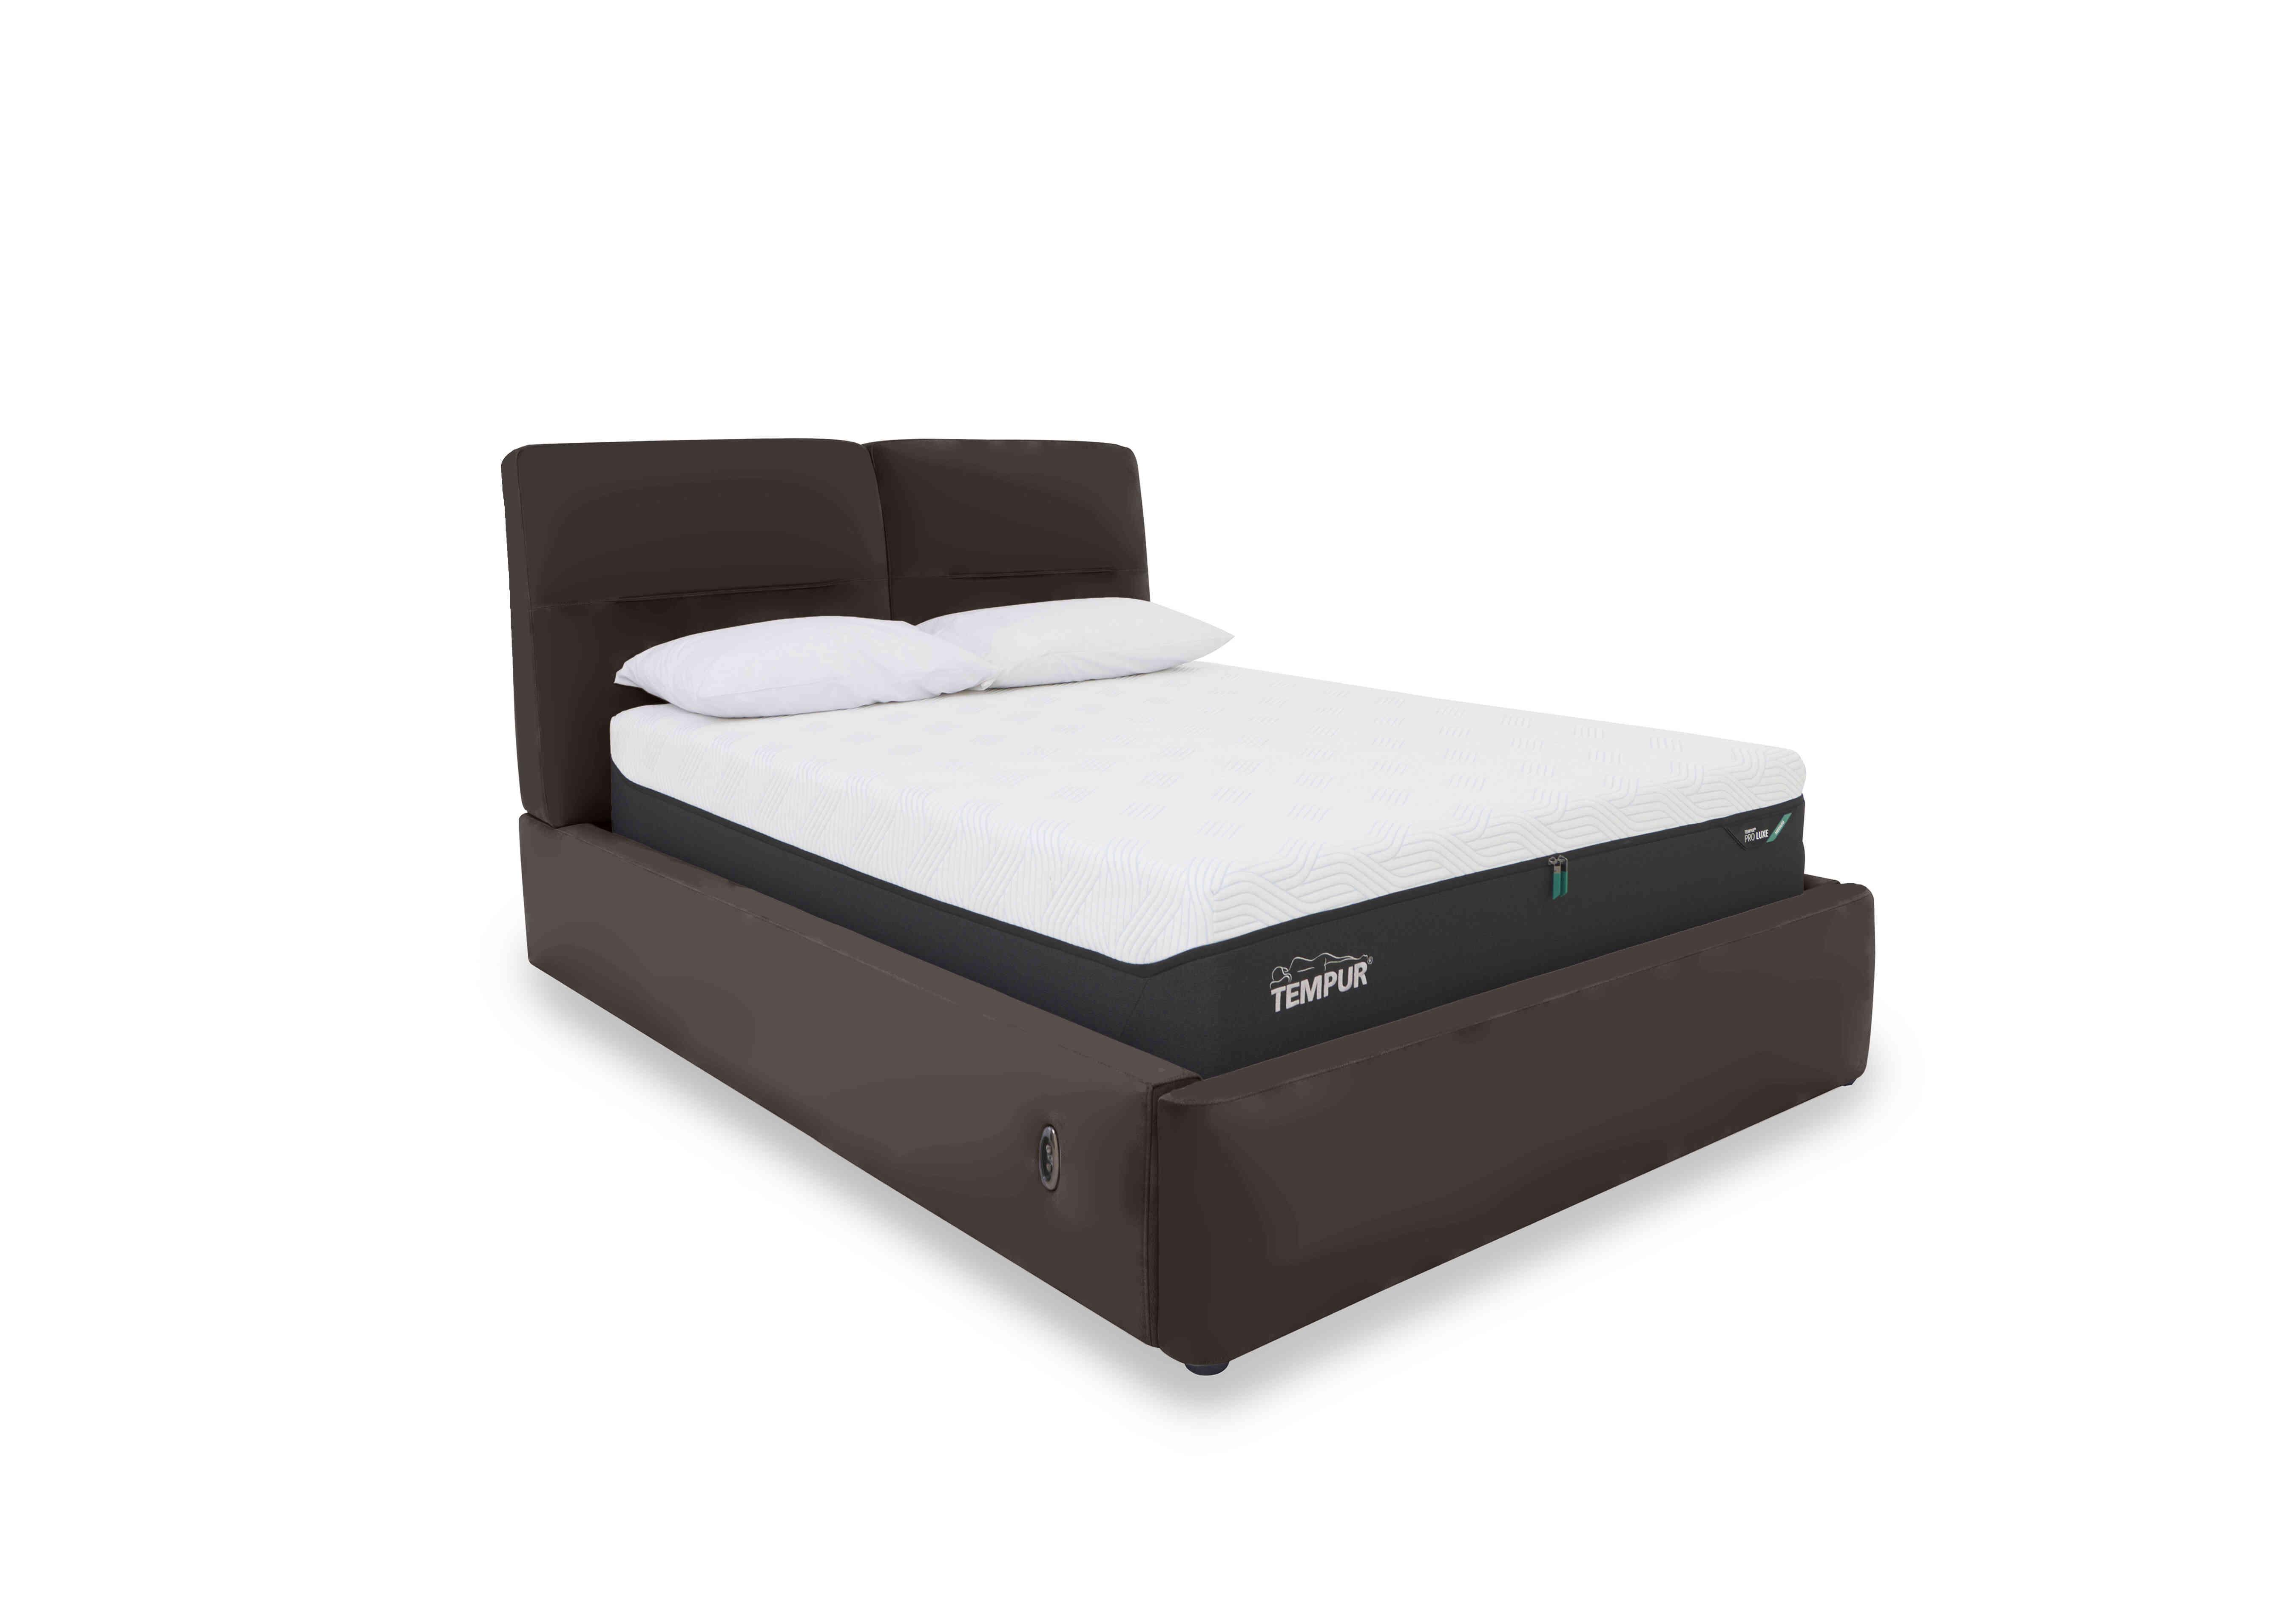 Stark Leather Electric Ottoman Bed Frame in Bv-1748 Dark Chocolate on Furniture Village